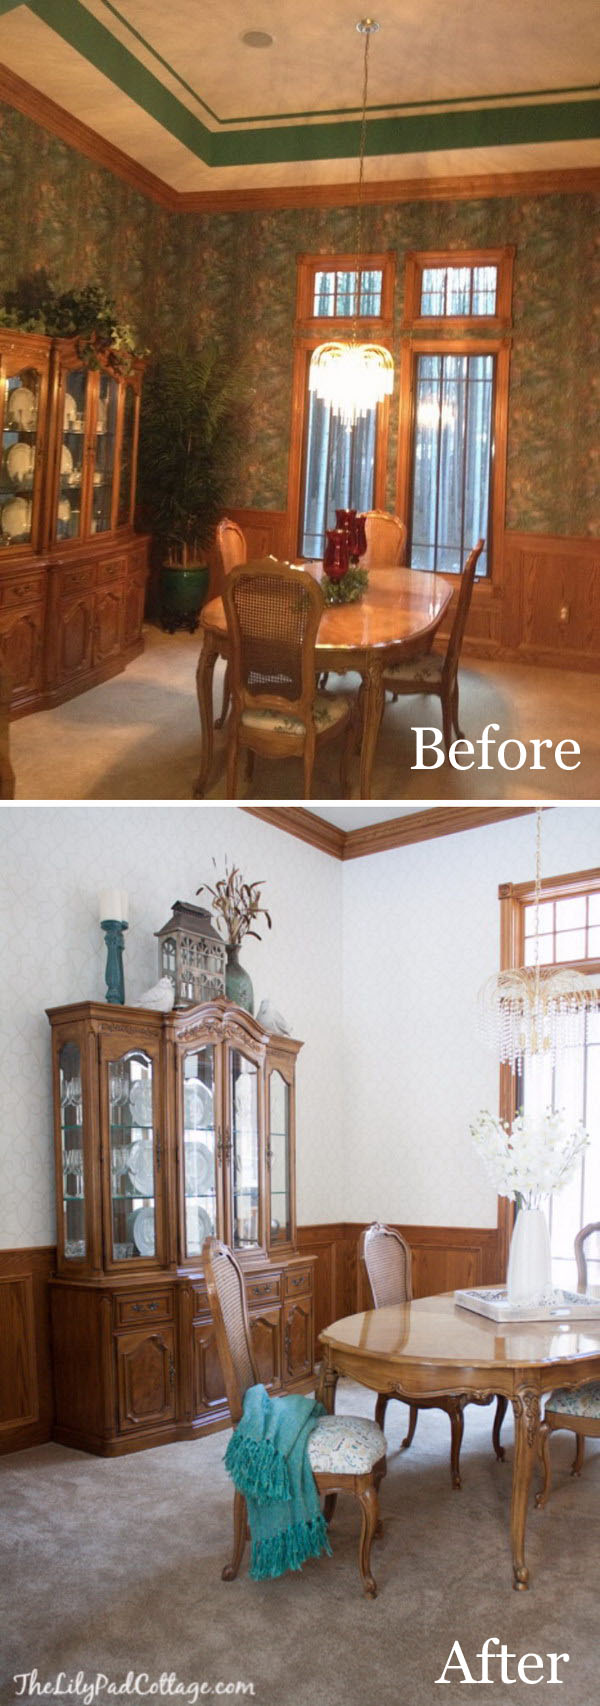 Great transformation with just changing the dark wallpaper. 